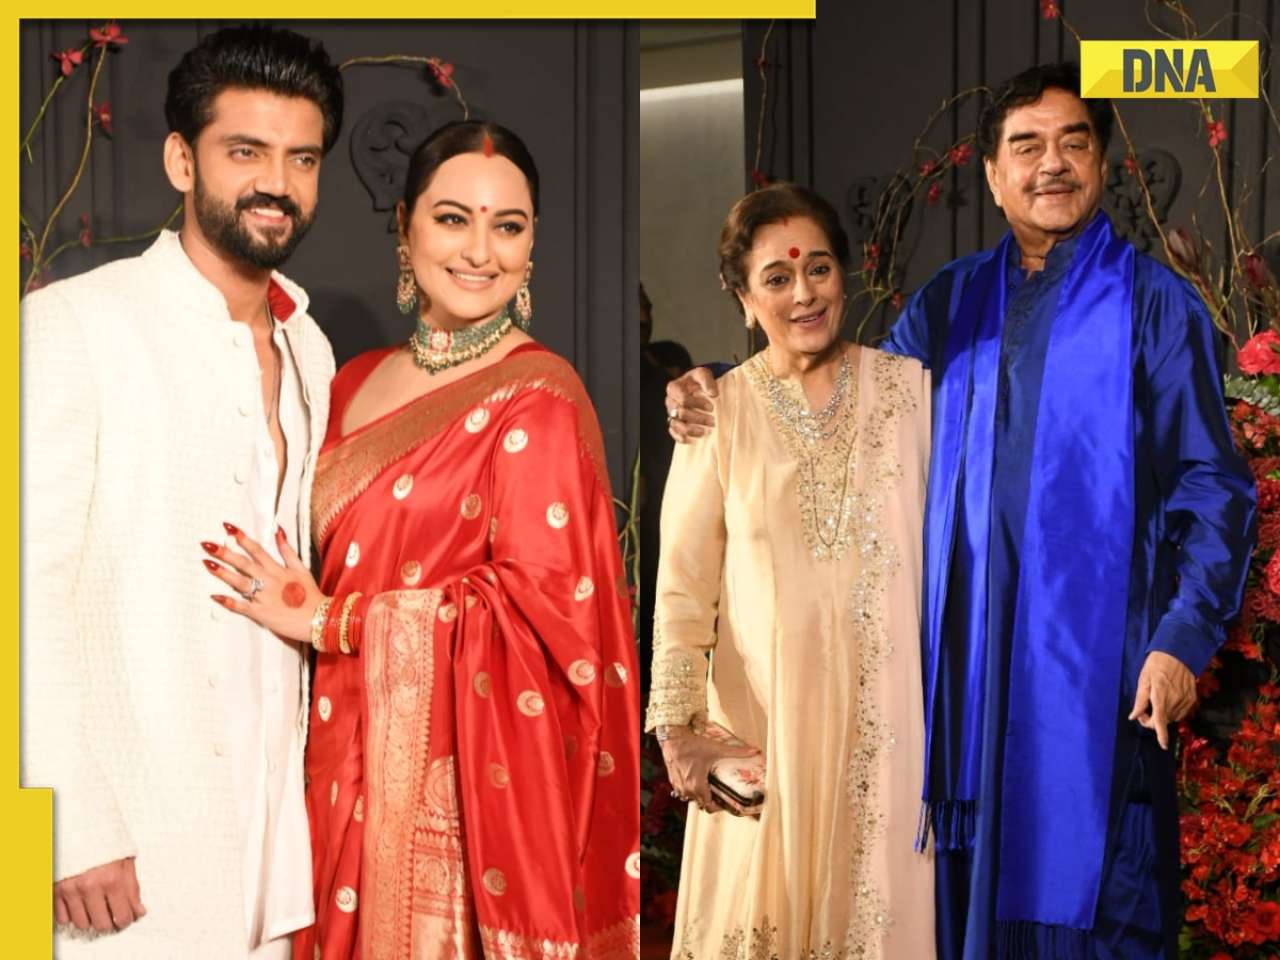 Shatrughan Sinha shares first reaction after daughter Sonakshi Sinha's marriage to Zaheer Iqbal: 'My daughter looks...'